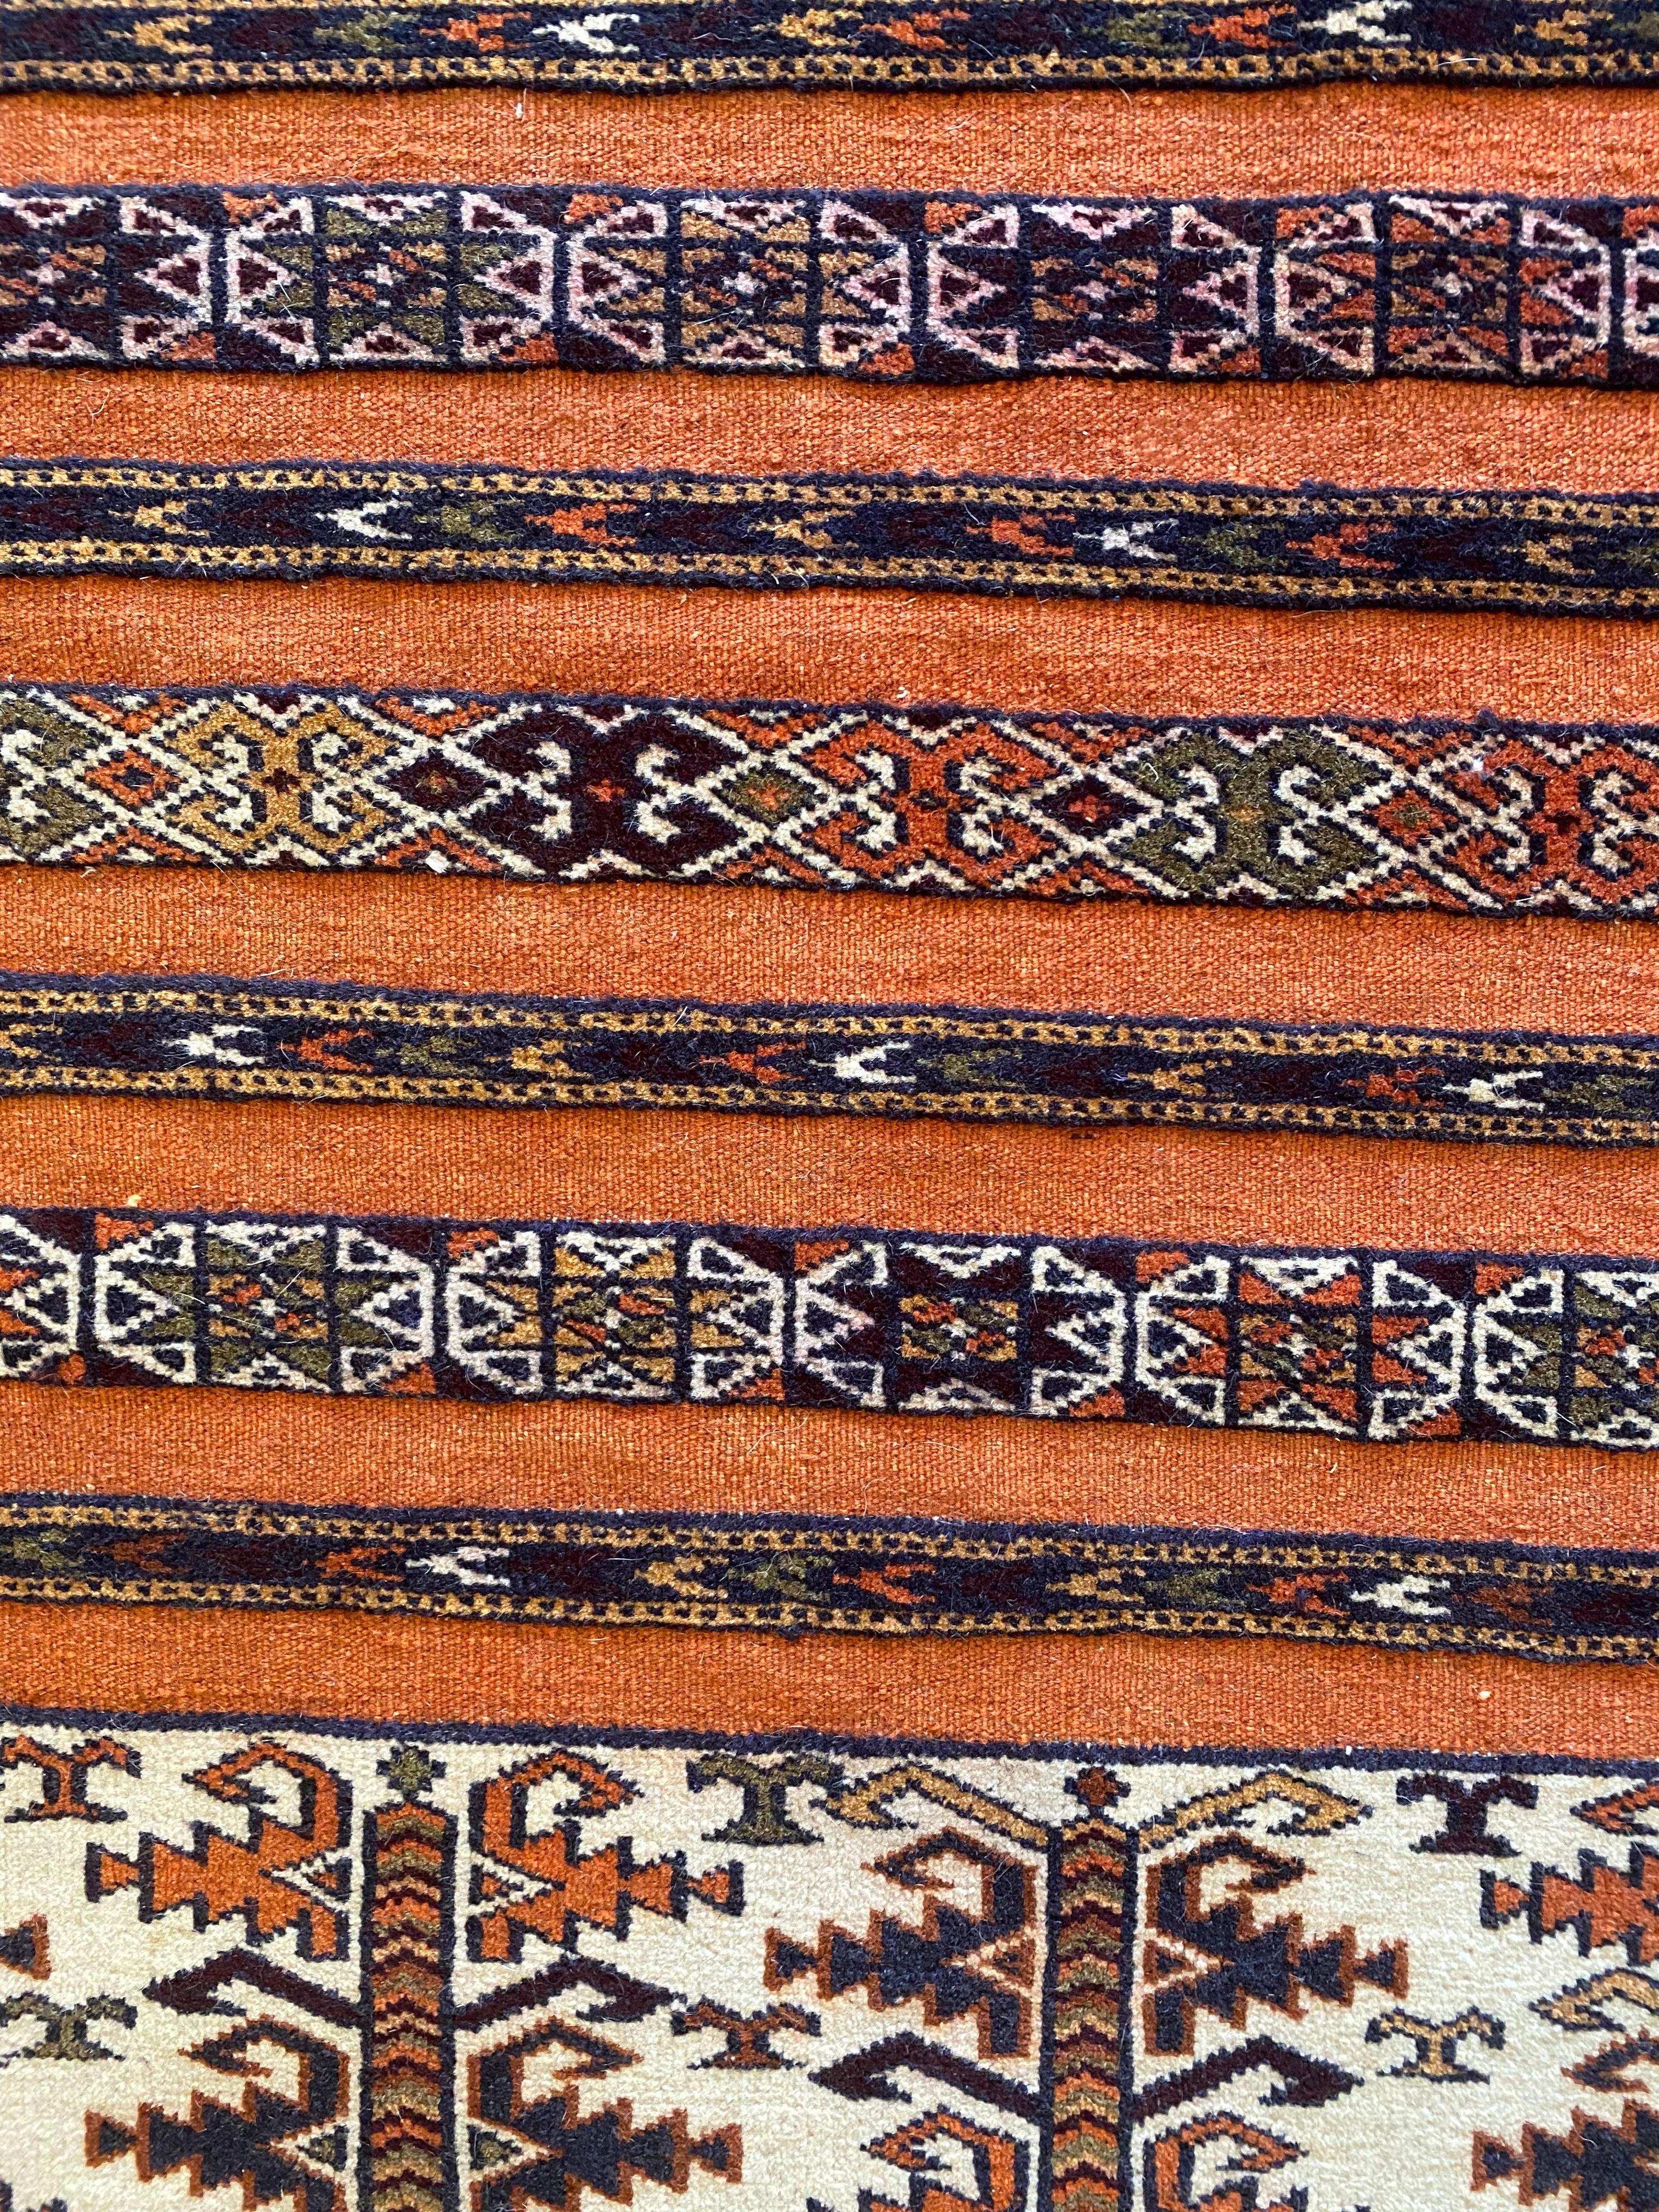 Hand-Knotted Turkmenistan Yomud Tribal Rug, Early 20th Century For Sale